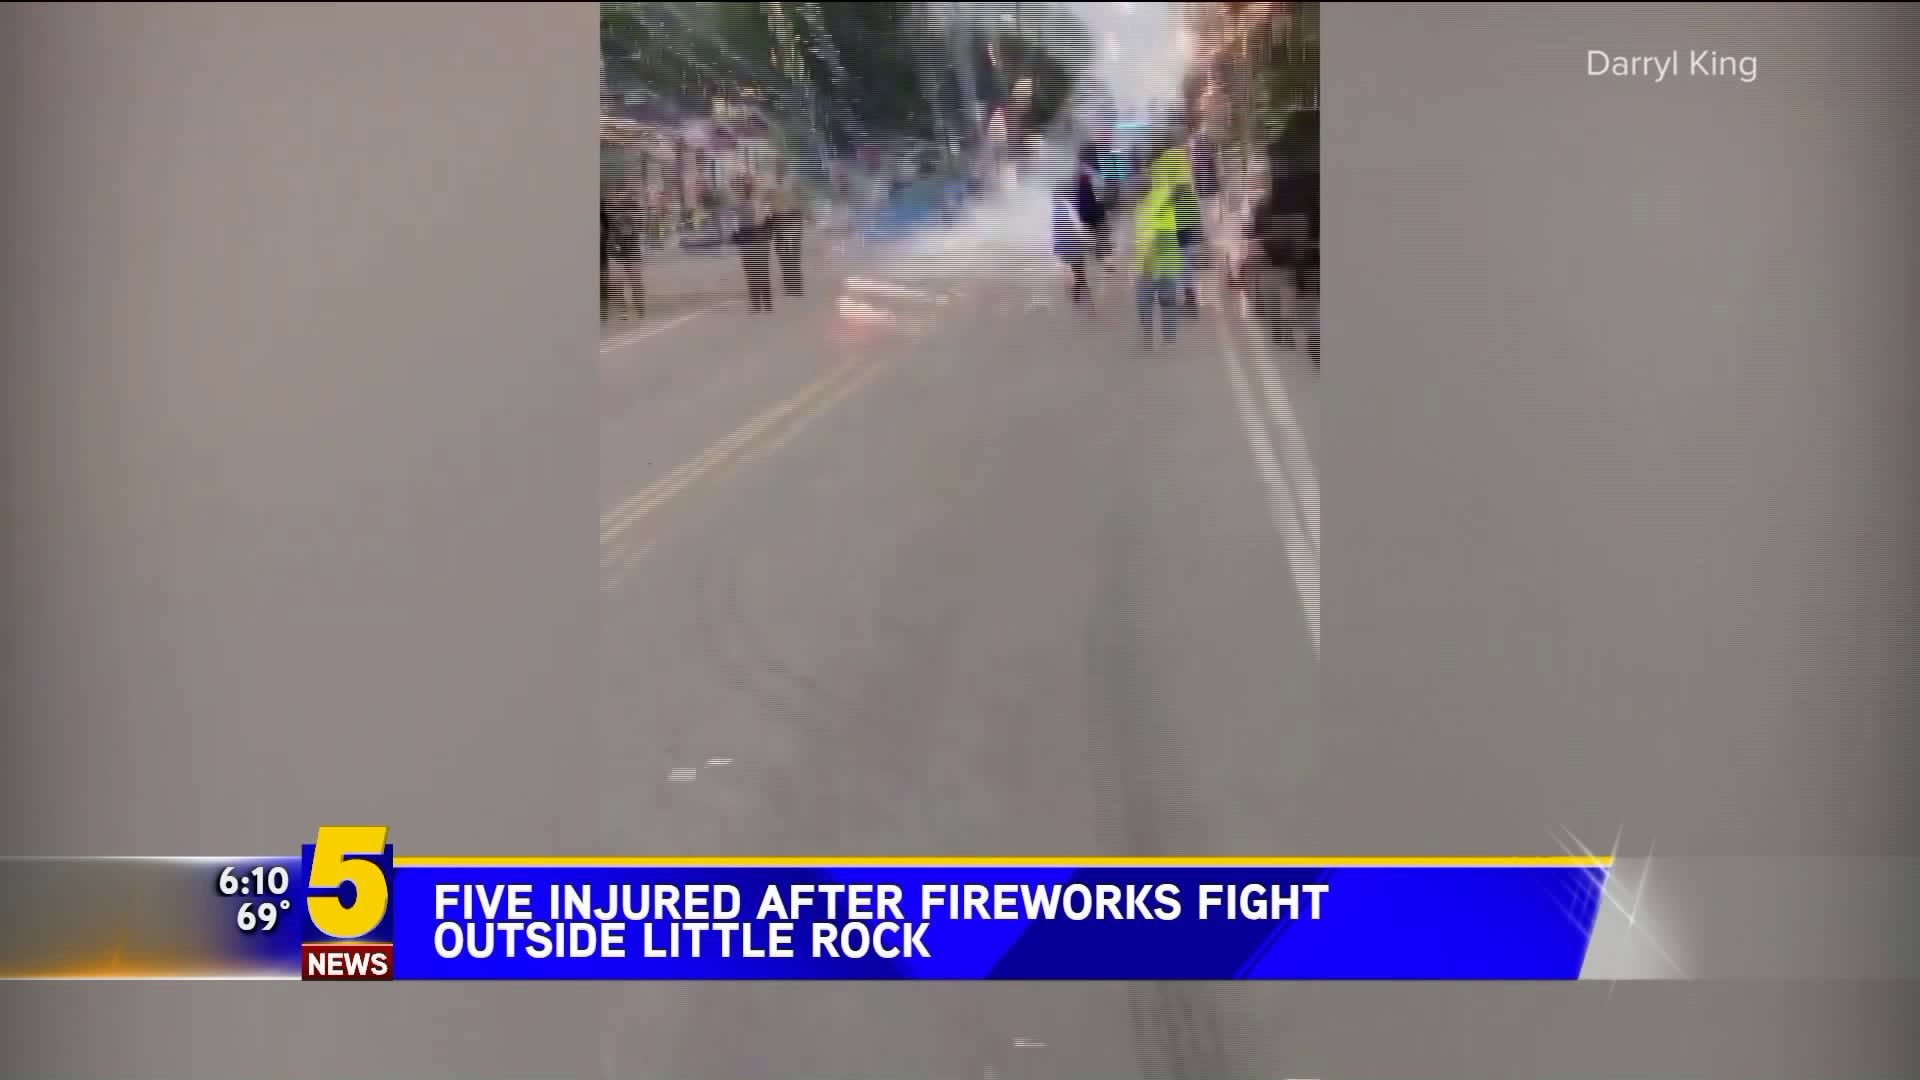 12 Arrested, 5 Injured In Fireworks Fight In Arkansas Town